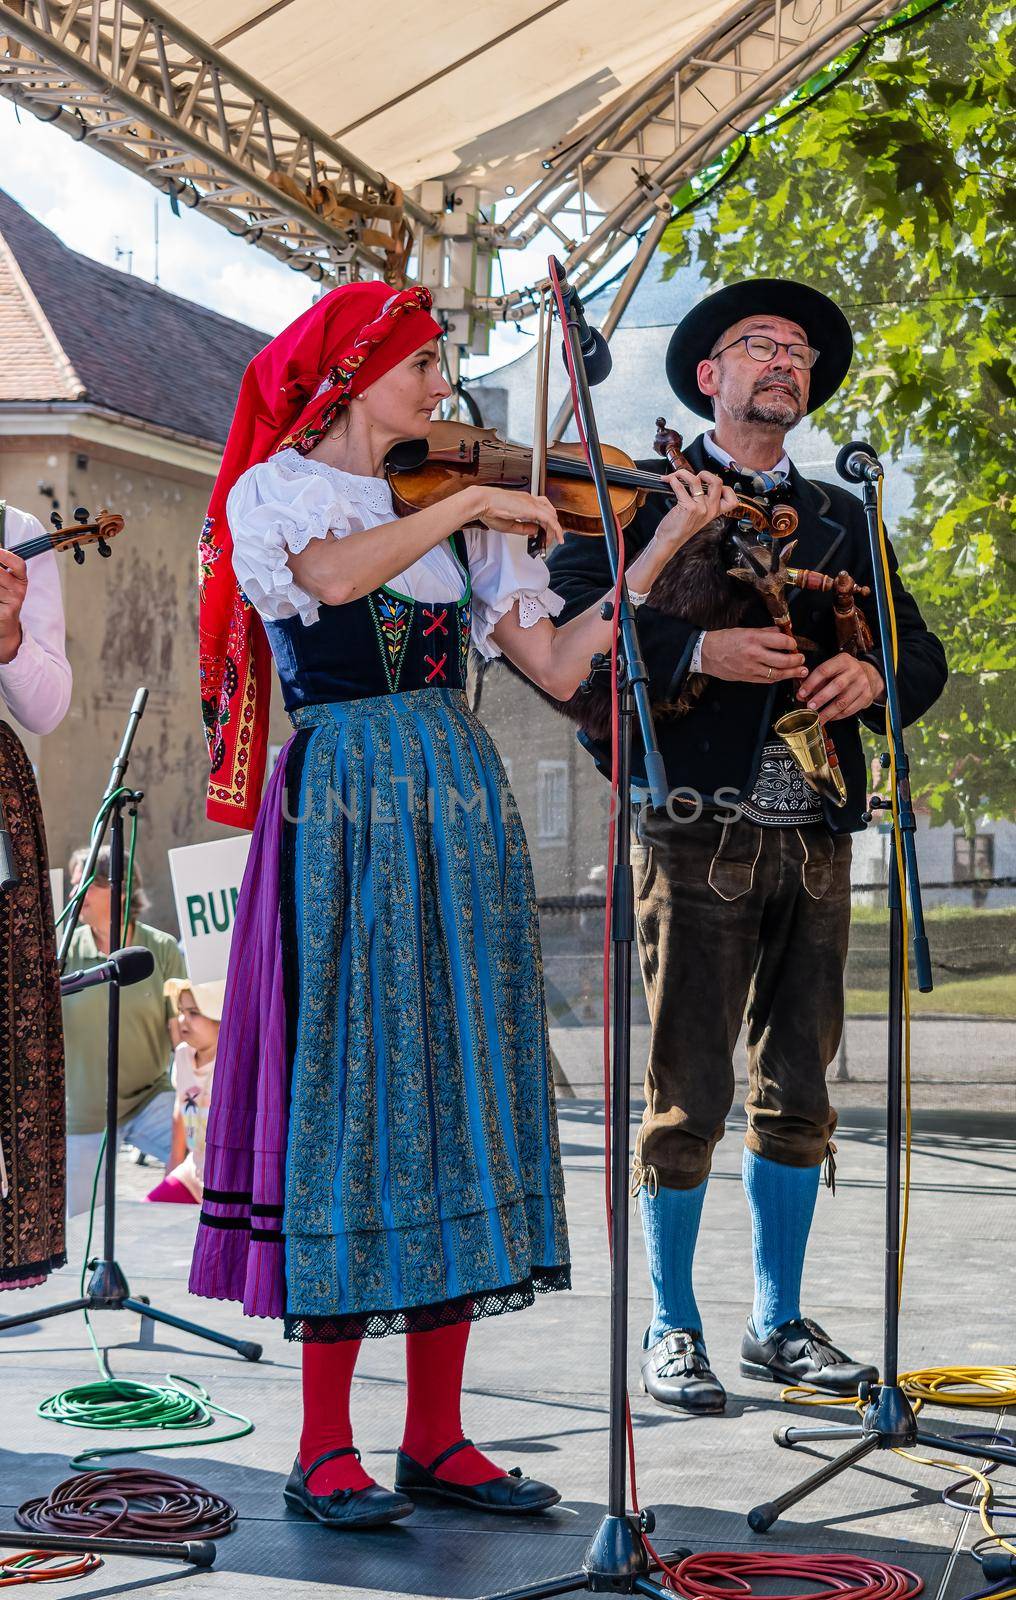 Straznice, Czech Republic - June 25, 2022 International Folklore Festival. Bagpiper and violinist on stage in Straznice